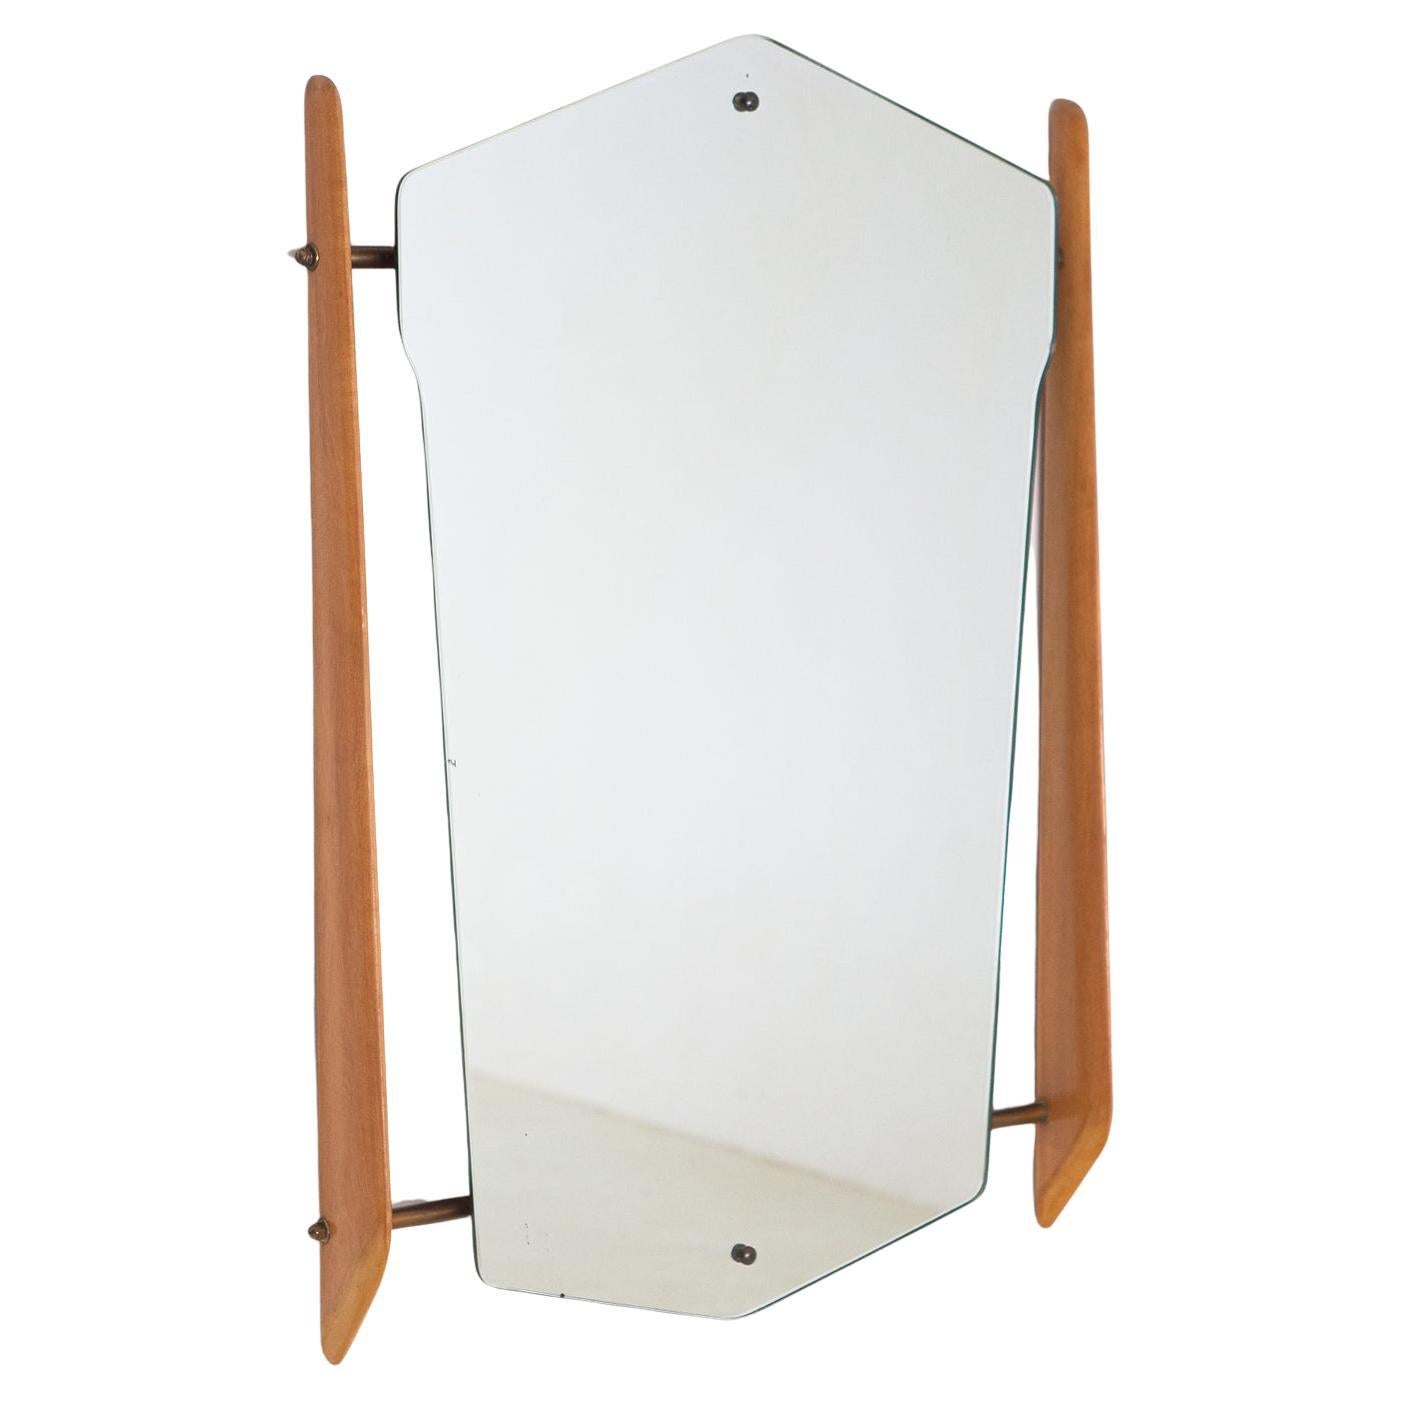 1950s Italian Wall Mirror with Maple Wood and Brass Frame